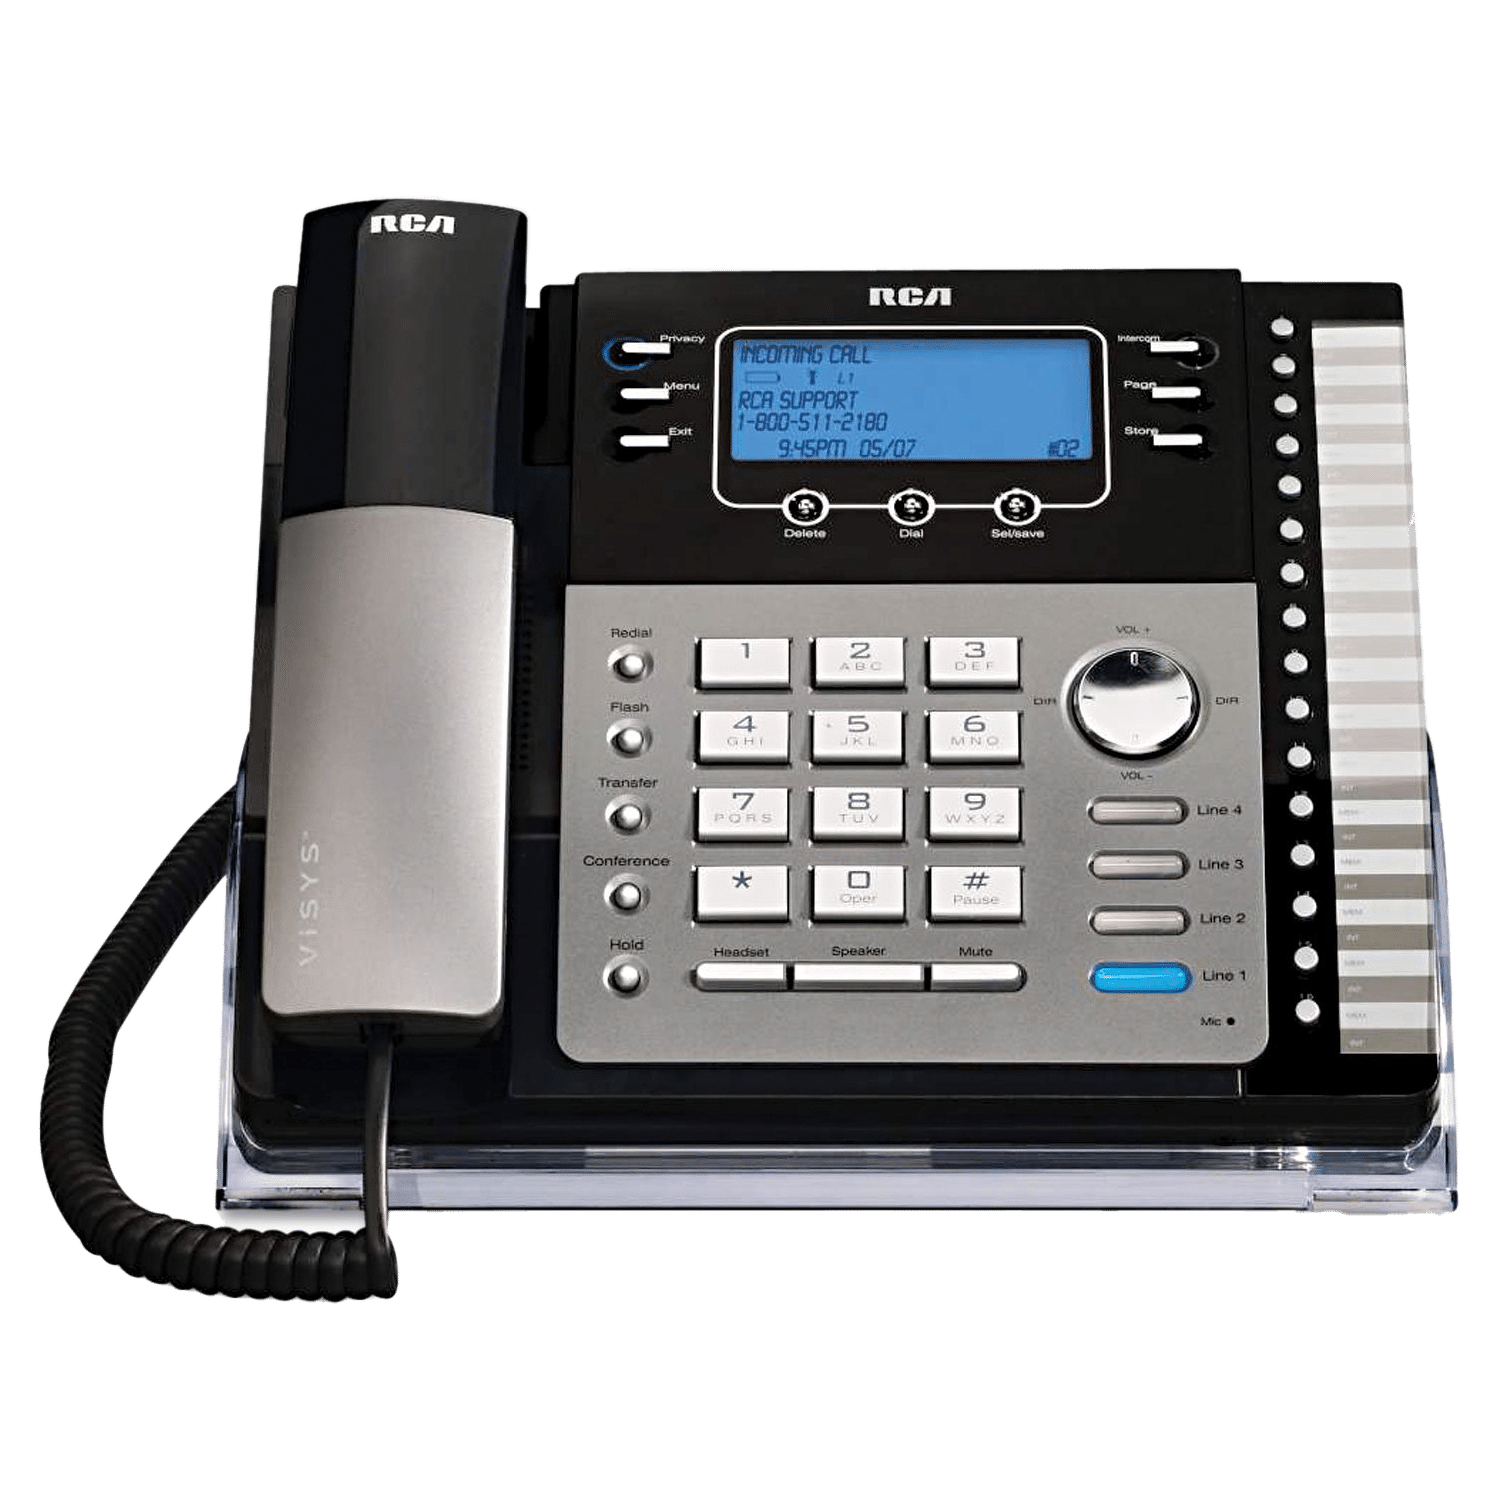 4 Line System, Analog systems, Phone, Analog, 4-Line Phone, Analog System, VTech, Phone System, Digital, Phone Systems, VoIP, Hosted, Cloud, Tel-Data Consultation, Business Phones, Tel-Data Communications